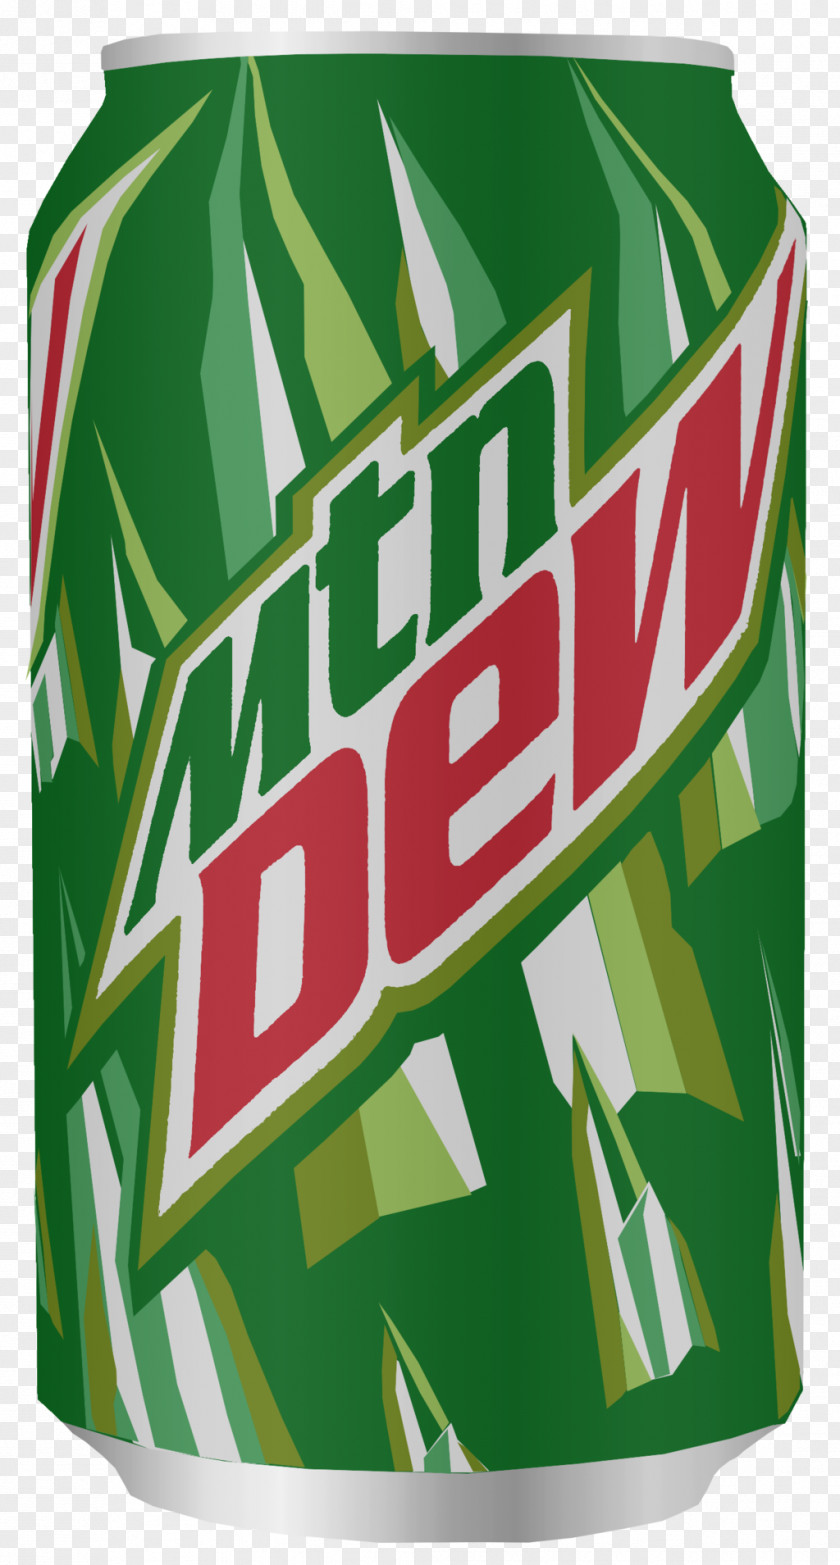 Mountain Dew Fizzy Drinks Diet Cola Pepsi Carbonated Drink PNG